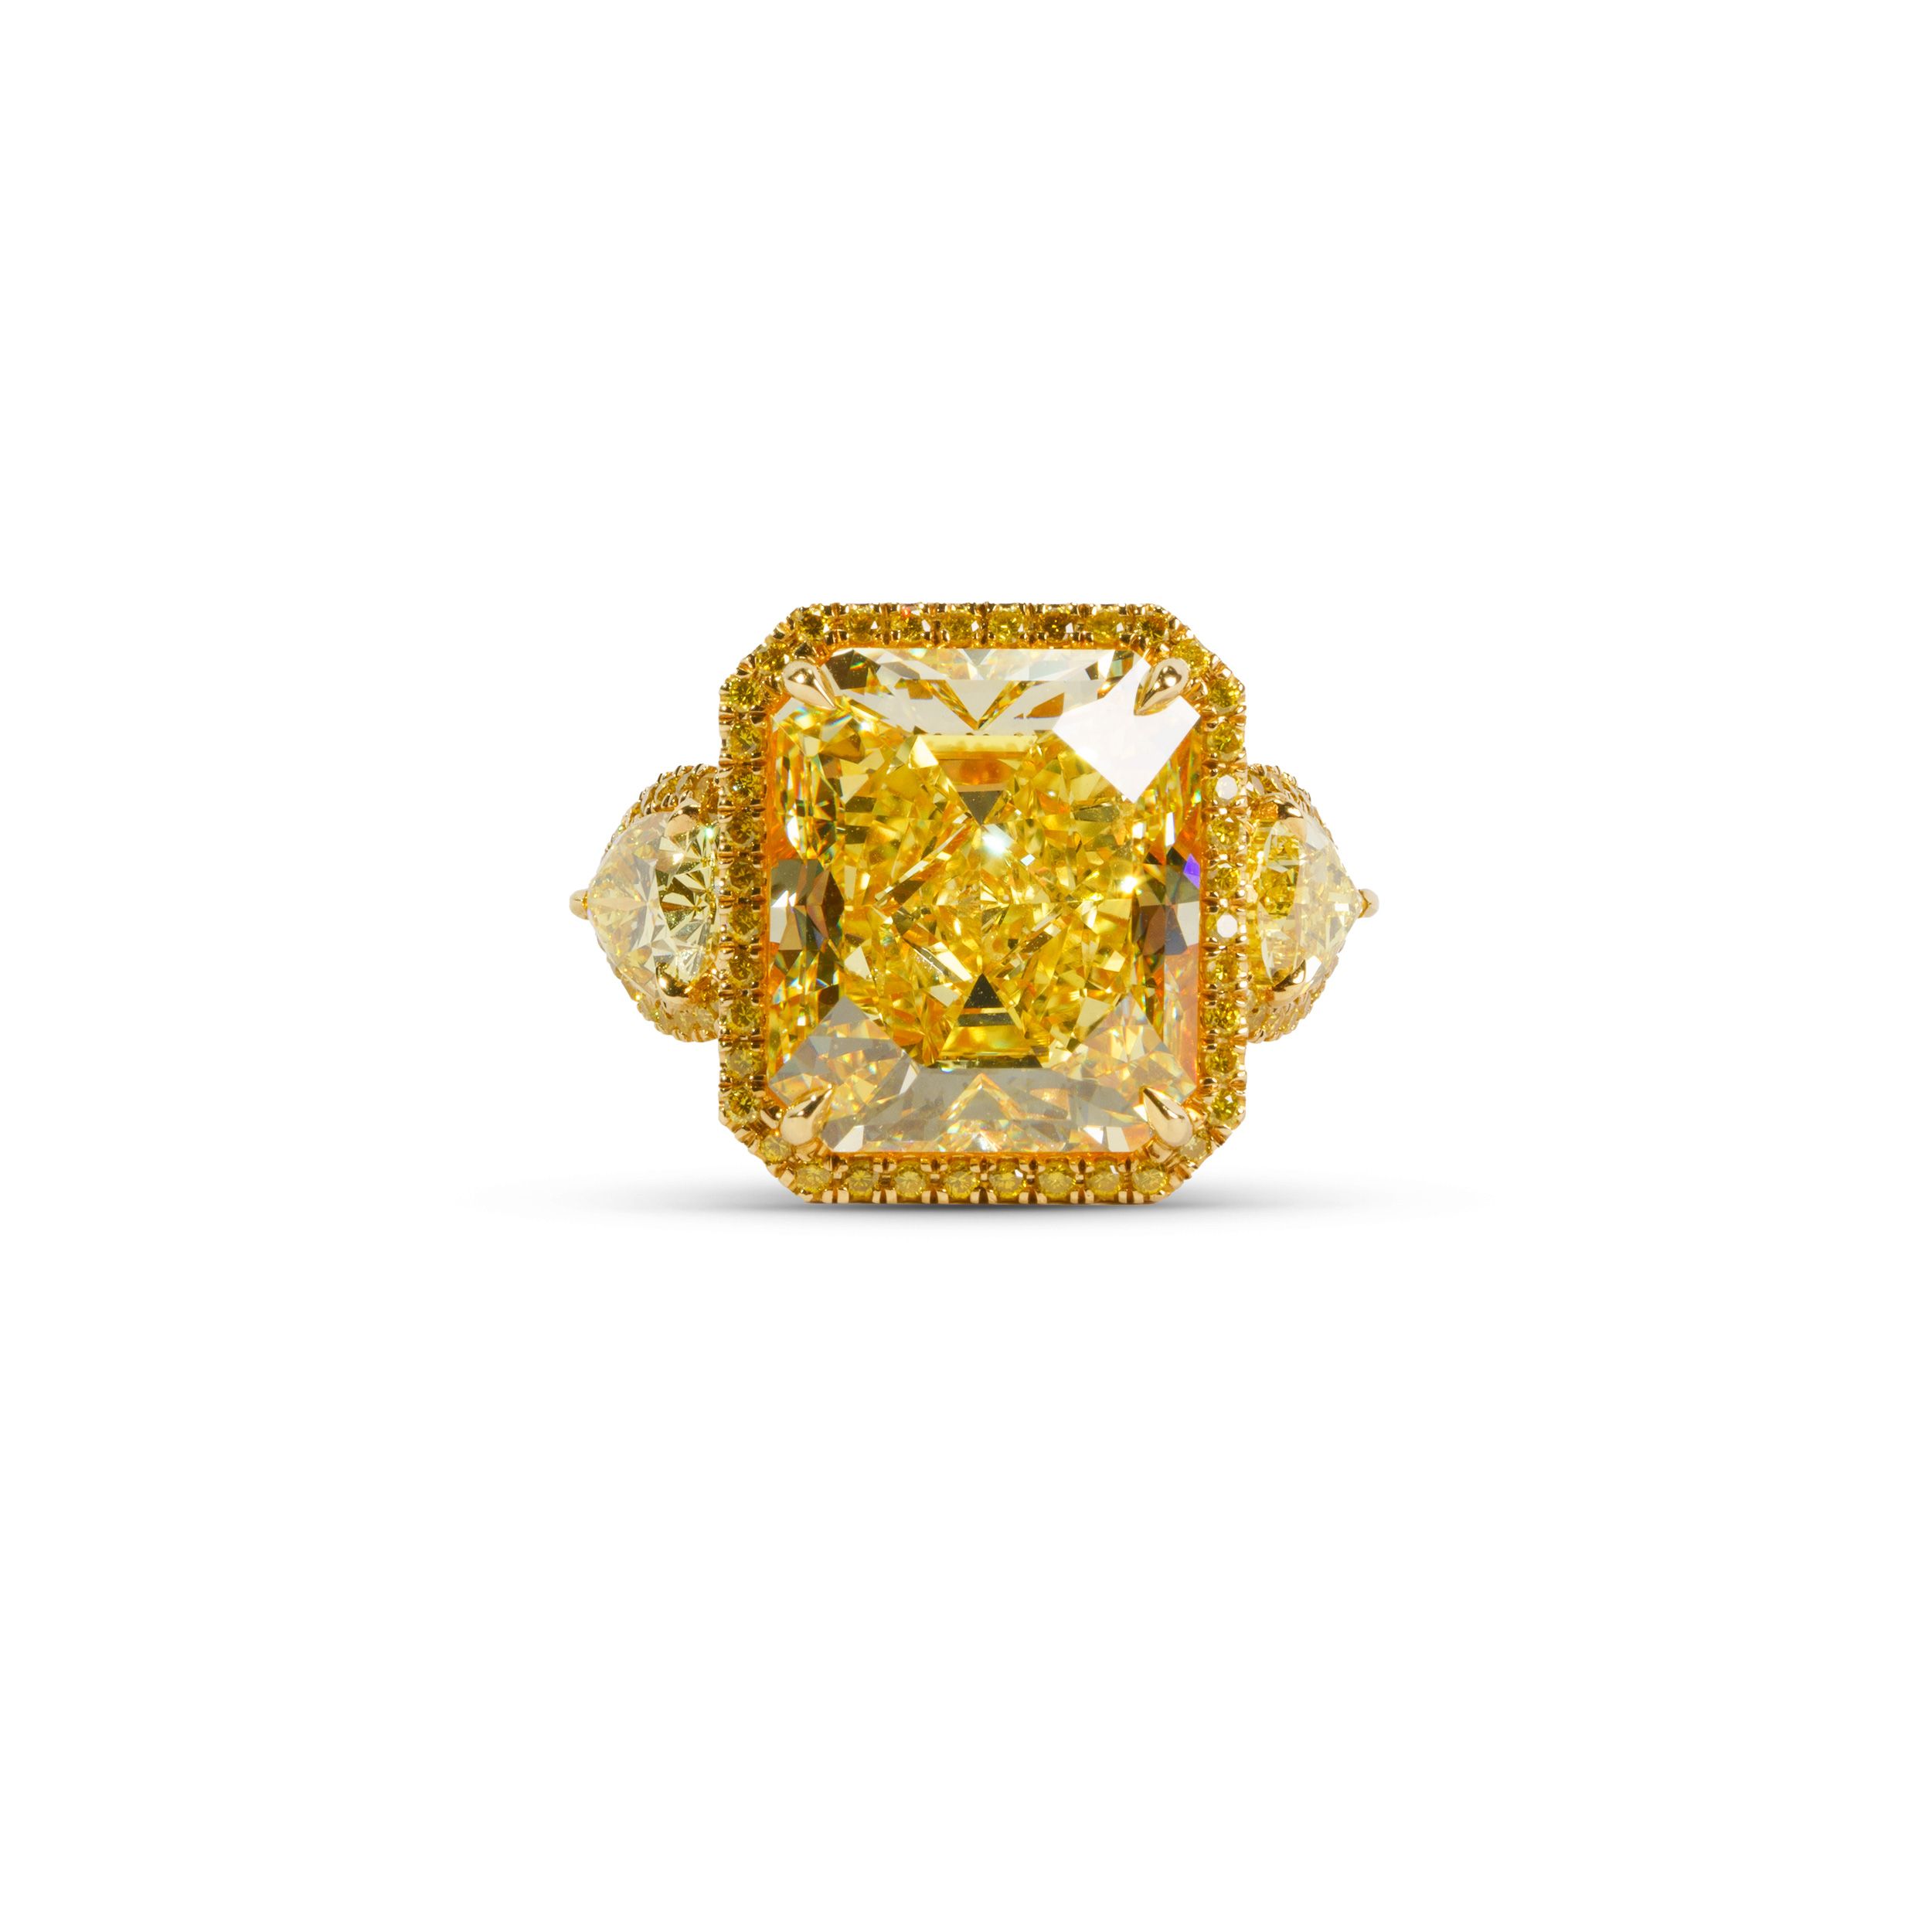 FANCY VIVID YELLOW DIAMOND RING OF 3.72 CARATS WITH GIA REPORT, | Christie's